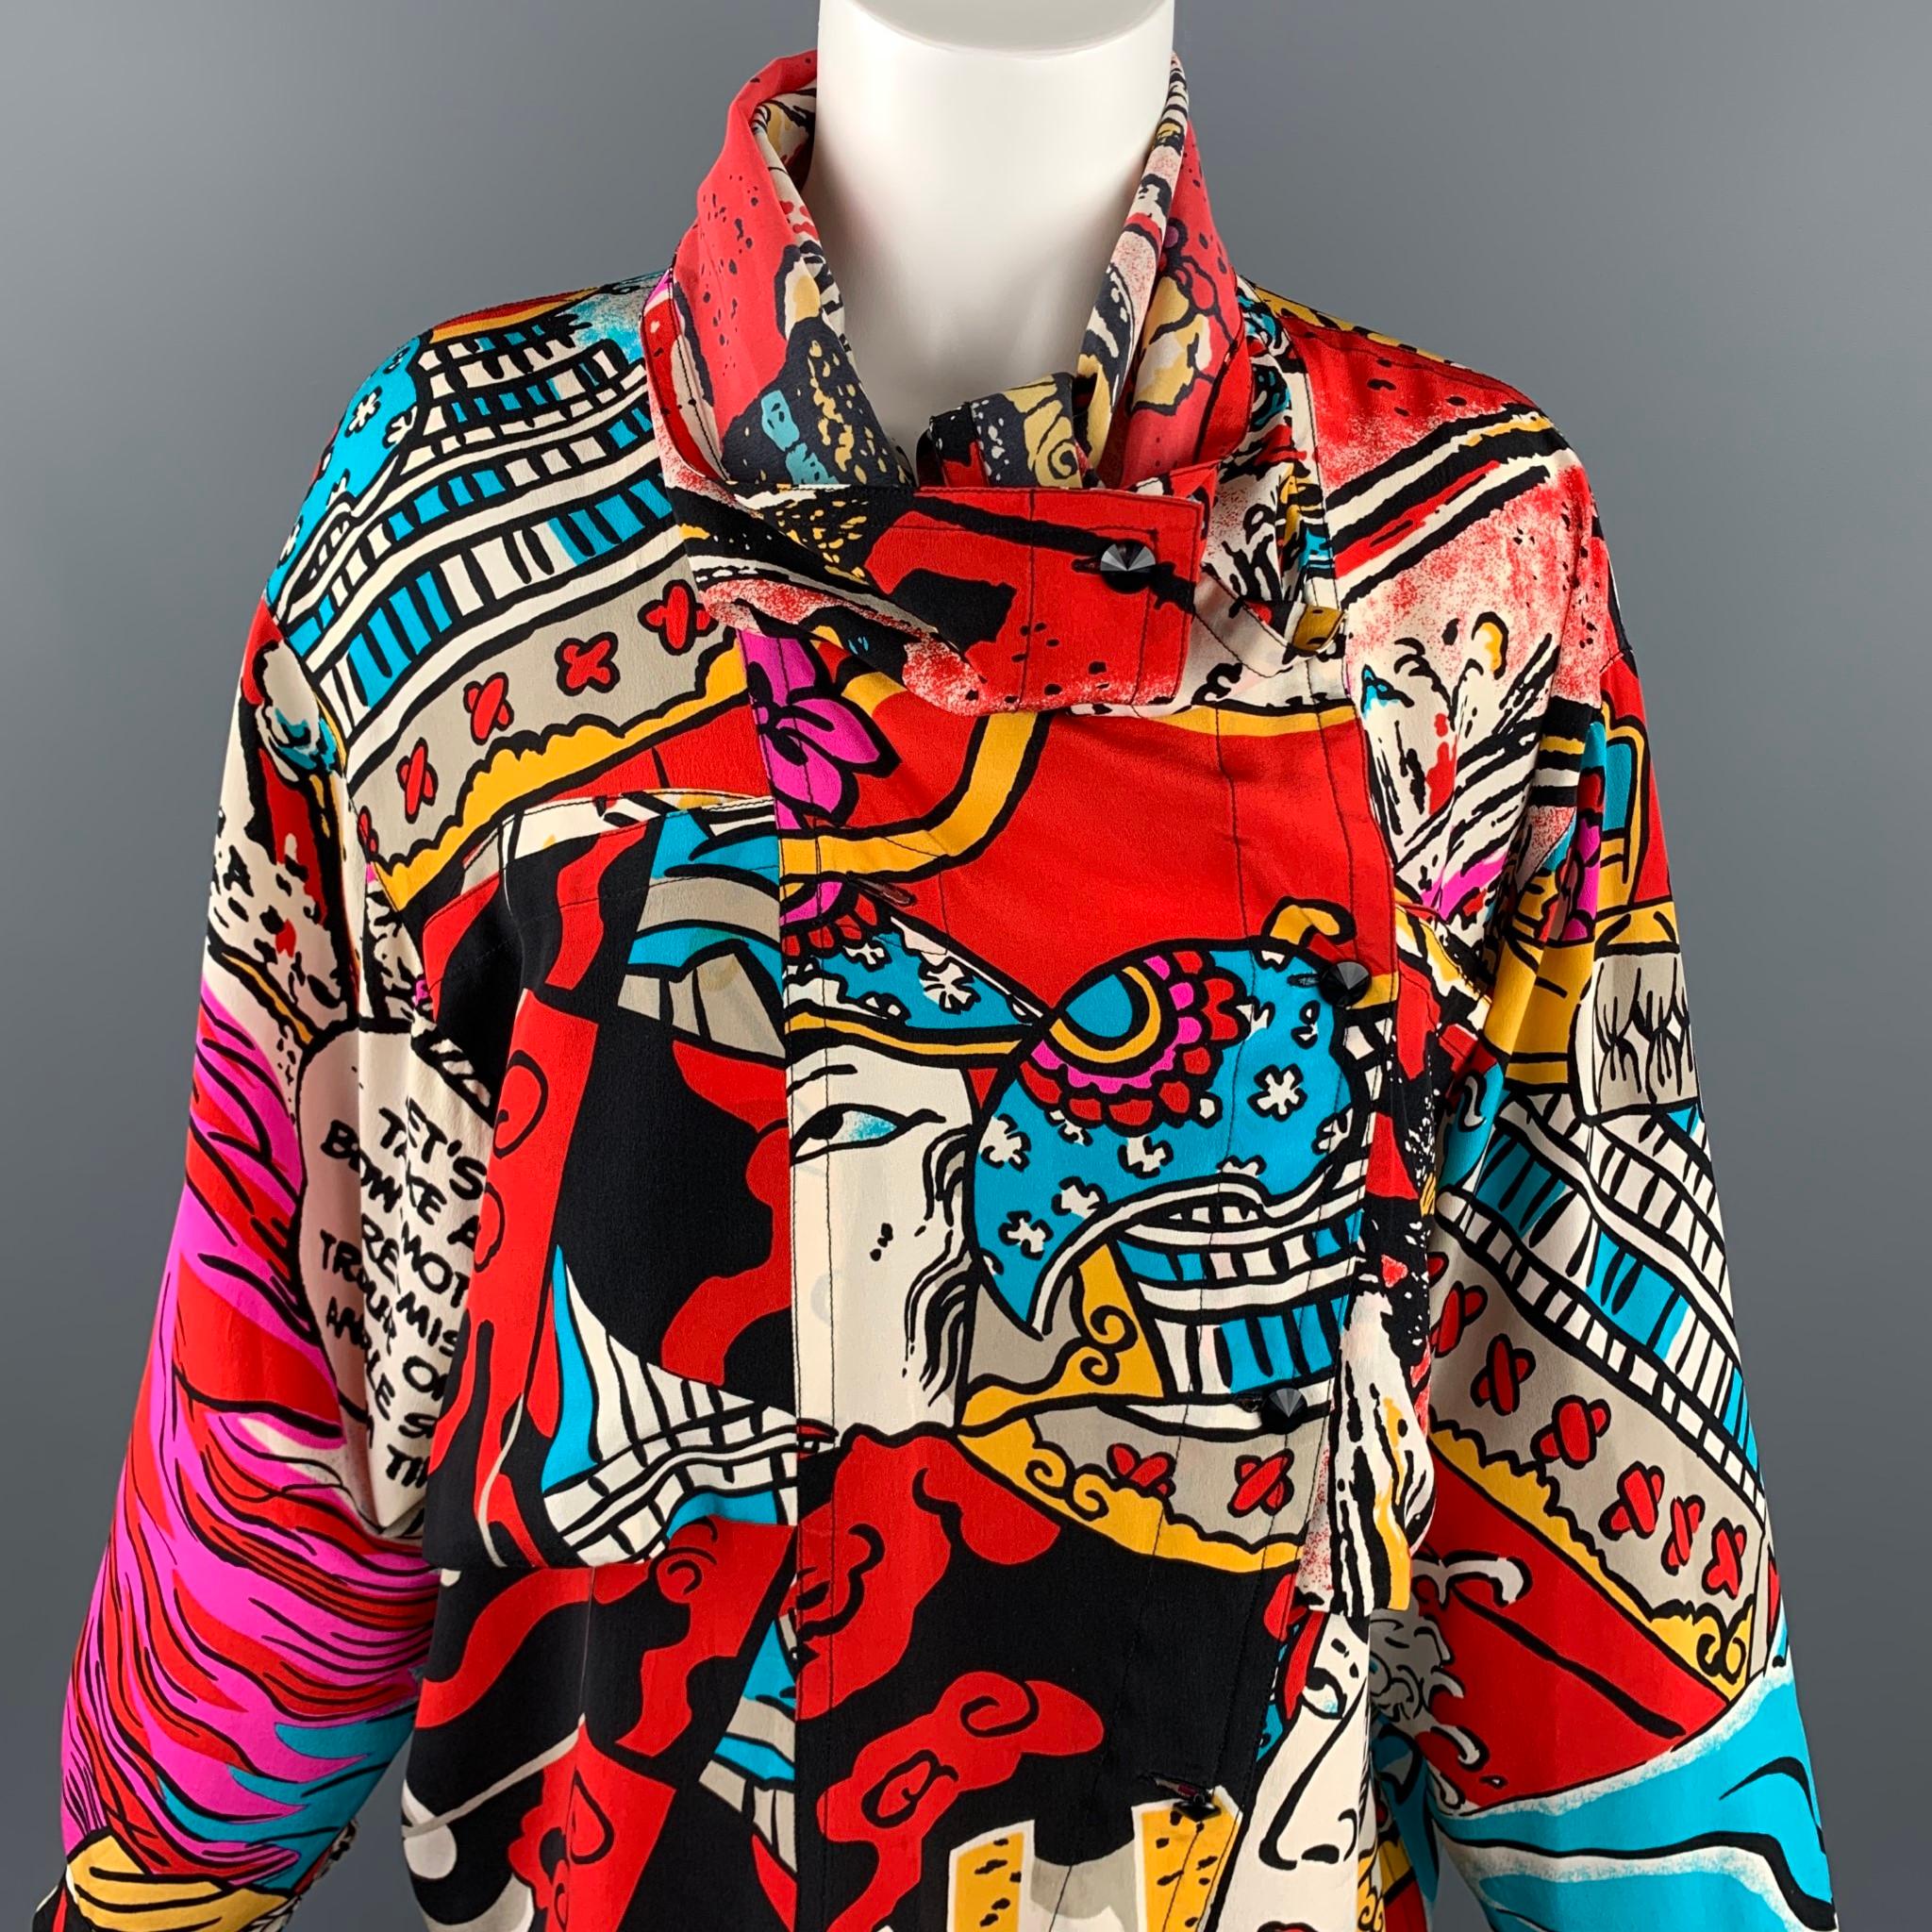 Vintage KANSAI YAMAMOTO blouse comes in a multi-color print fabric featuring a high collar, front pockets, and a buttoned closure.

Very Good Pre-Owned Condition.
Marked: Size not visible 

Measurements:

Shoulder: 19.5 in. 
Bust: 44 in. 
Sleeve: 21